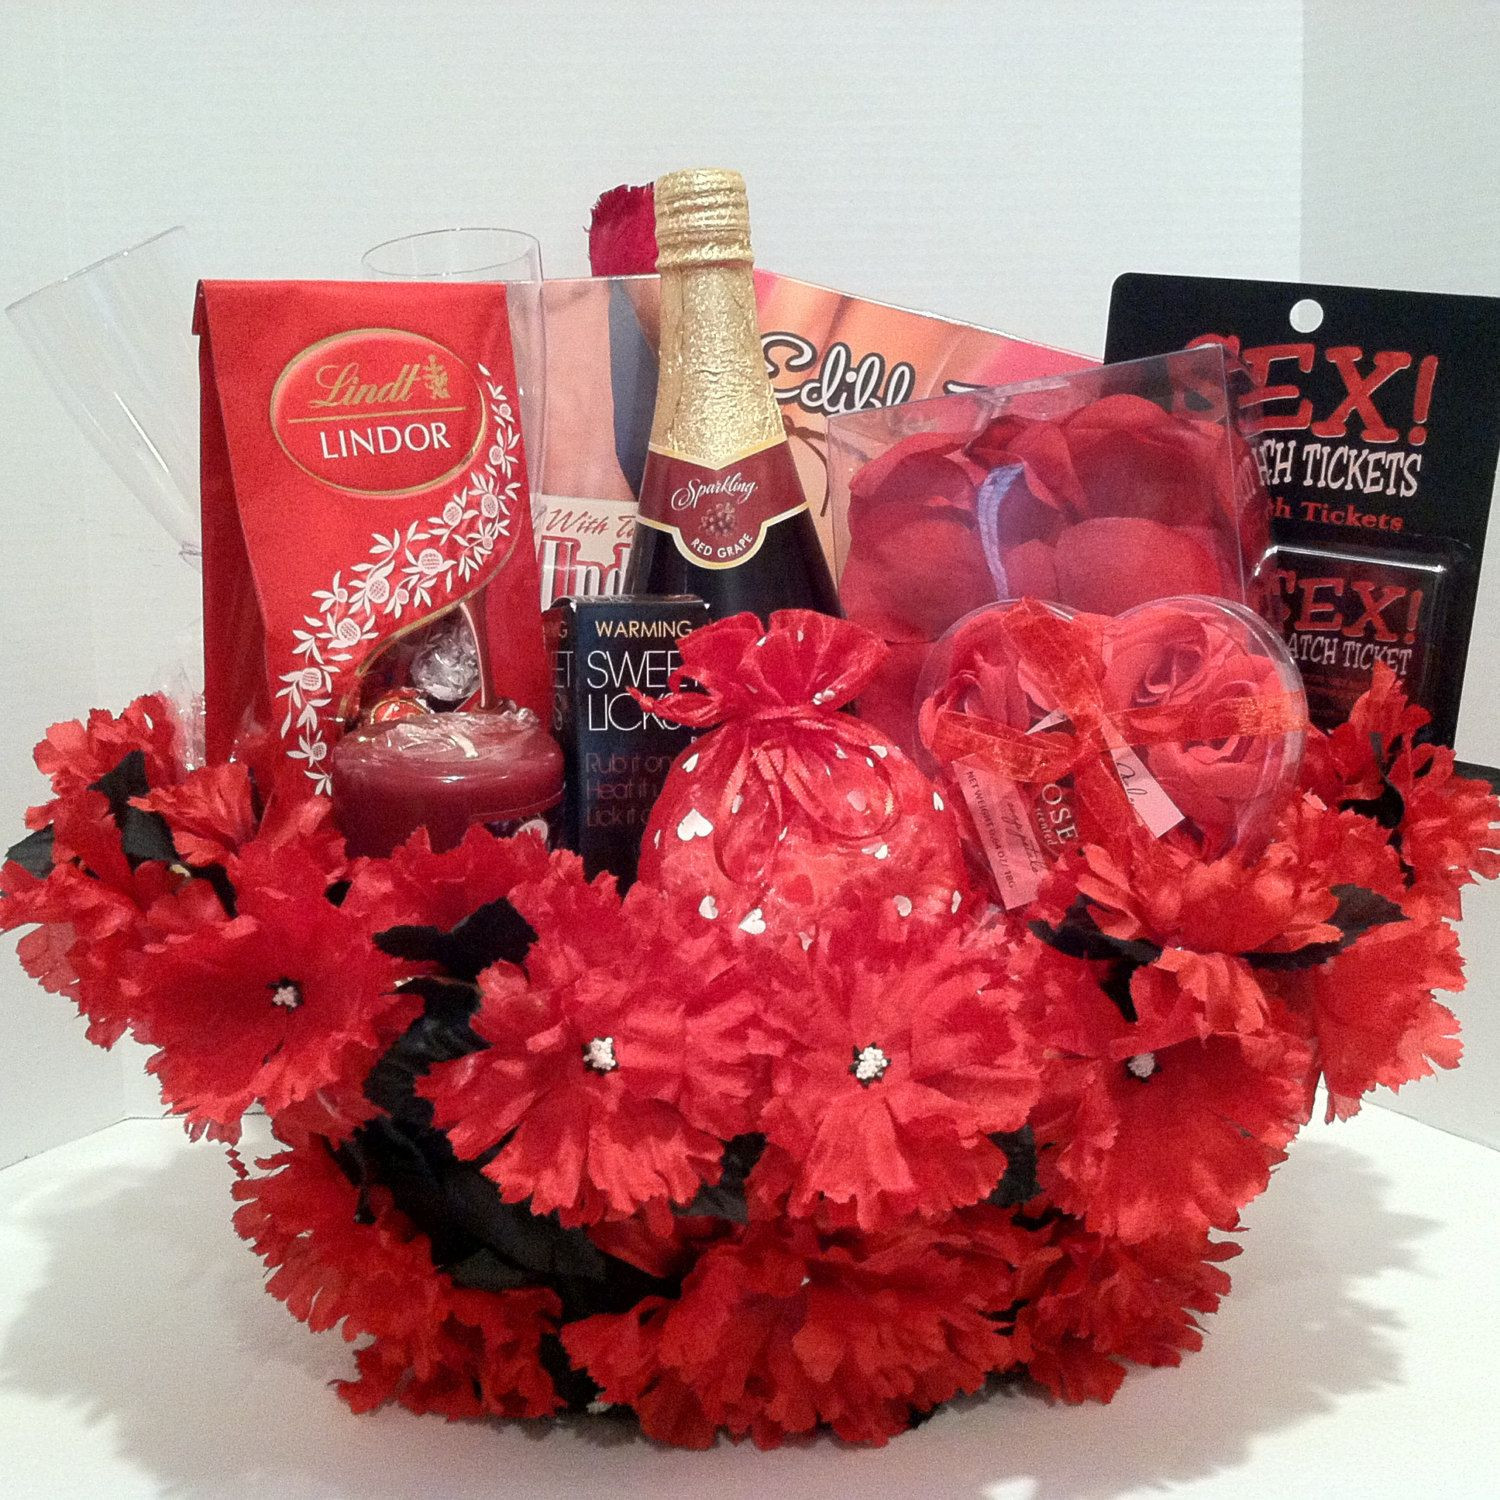 Romantic Gift Basket Ideas For Couples
 Romantic Evening Gift Baskets only at